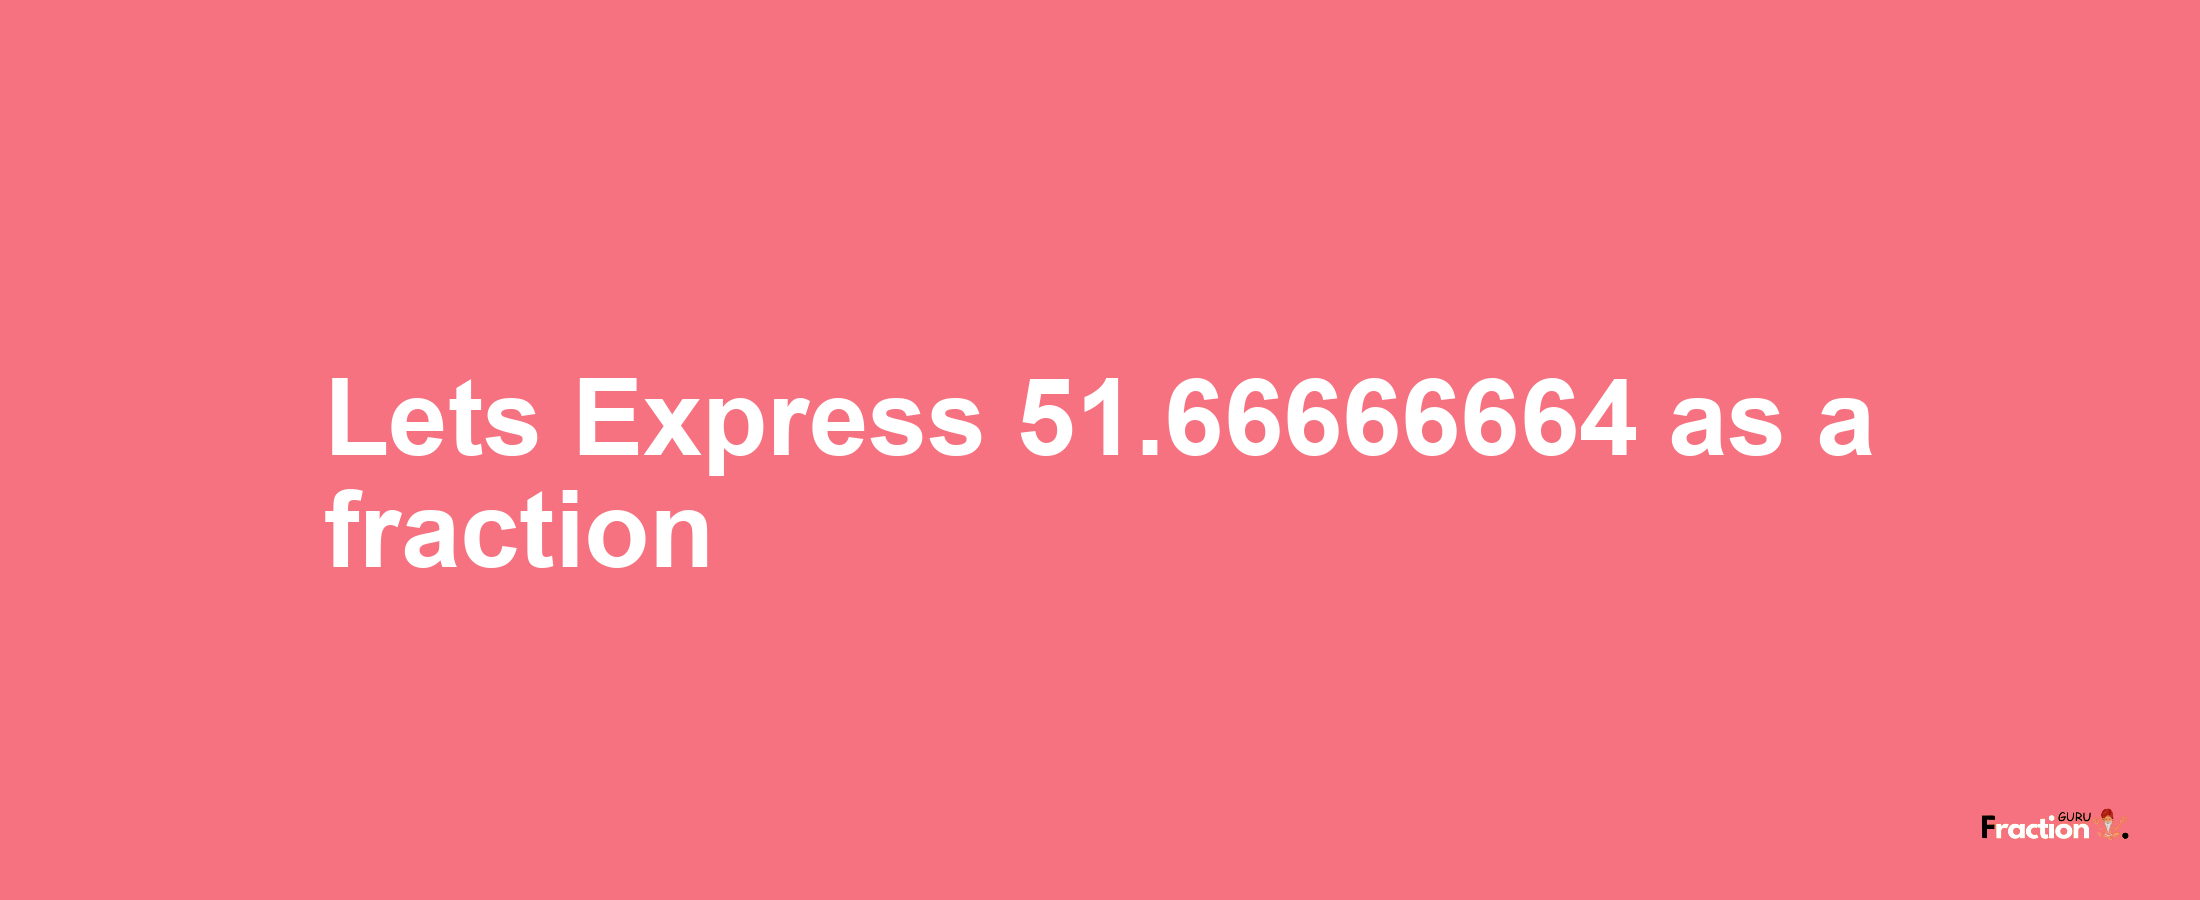 Lets Express 51.66666664 as afraction